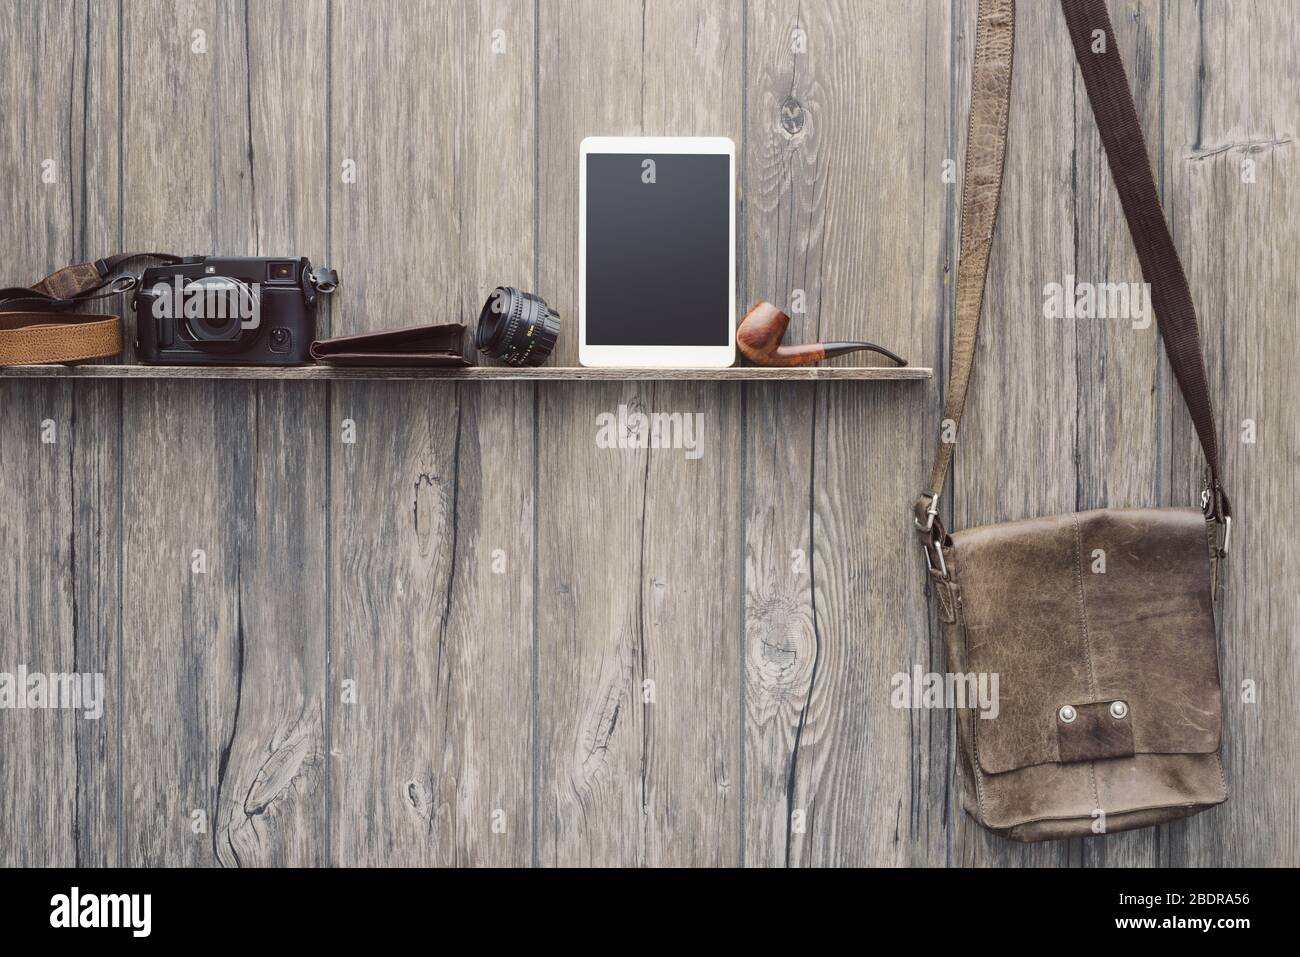 Shelf with a camera, tablet, a pipe and a leather bag hanging on the wall, hipster style Stock Photo